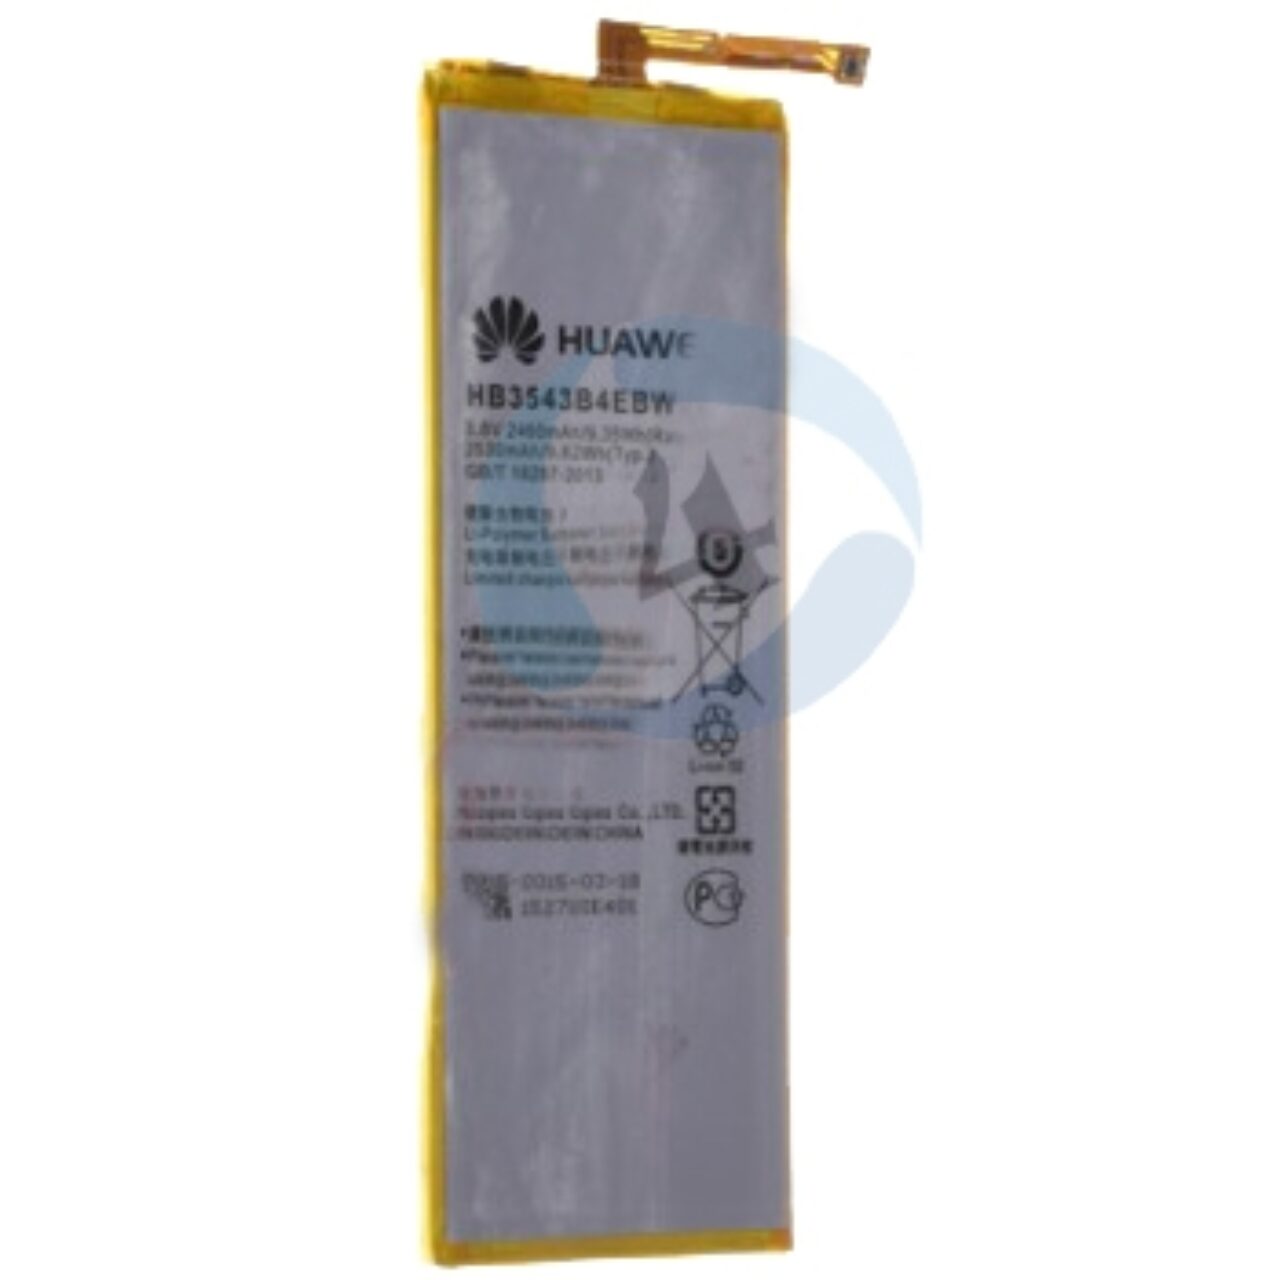 Huawei ascend p7 battery